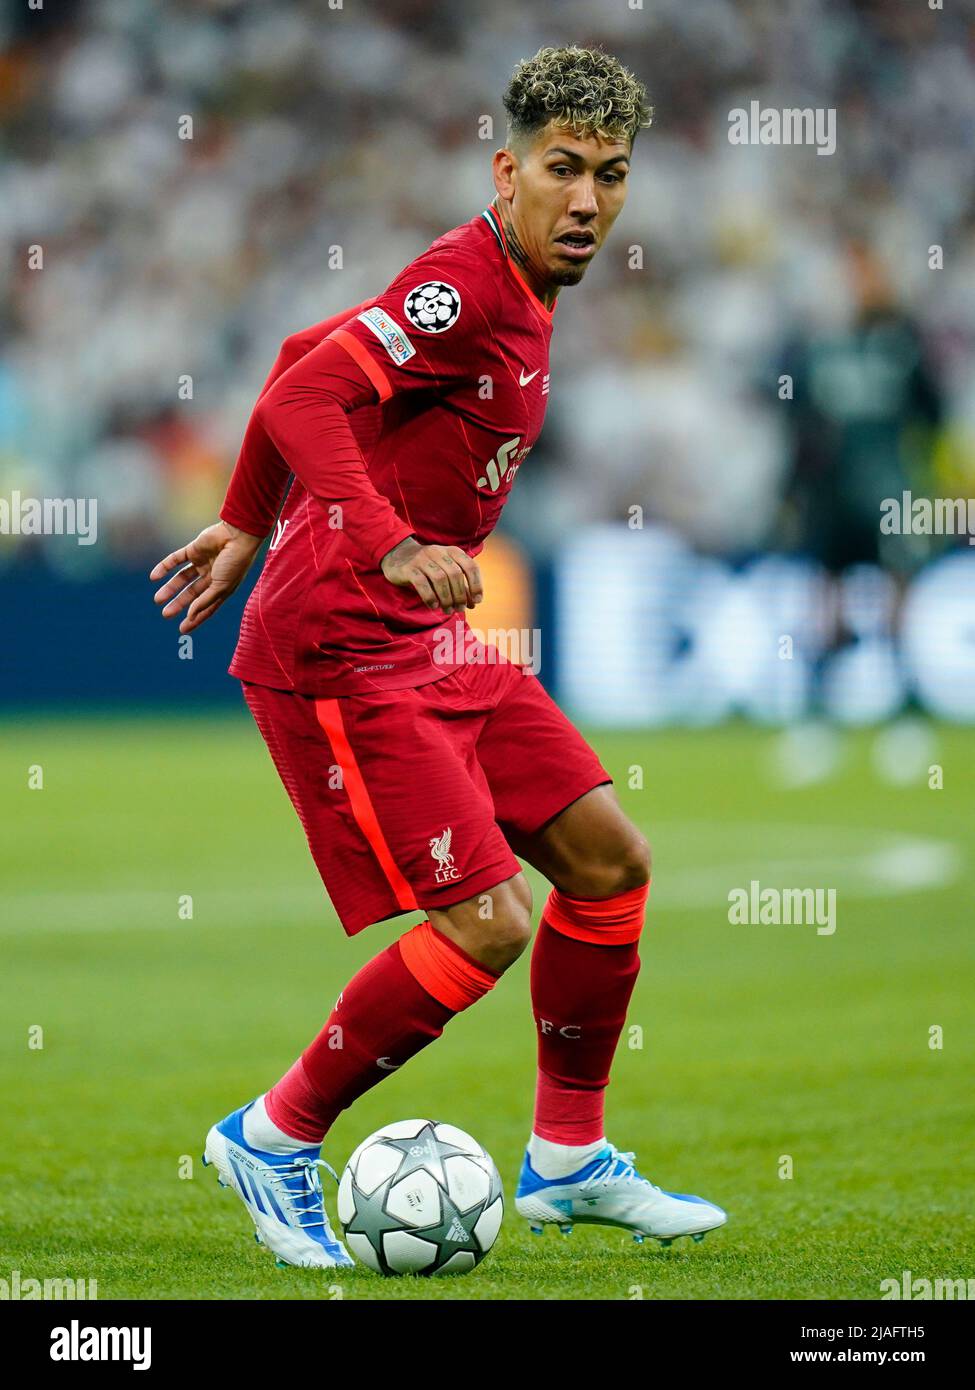 Roberto Firminho of Liverpool FC during the UEFA Champions League Final match between Liverpool FC and Real Madrid played at Stade de France on May 28, 2022 in Paris, France. (Photo / Magma) Stock Photo